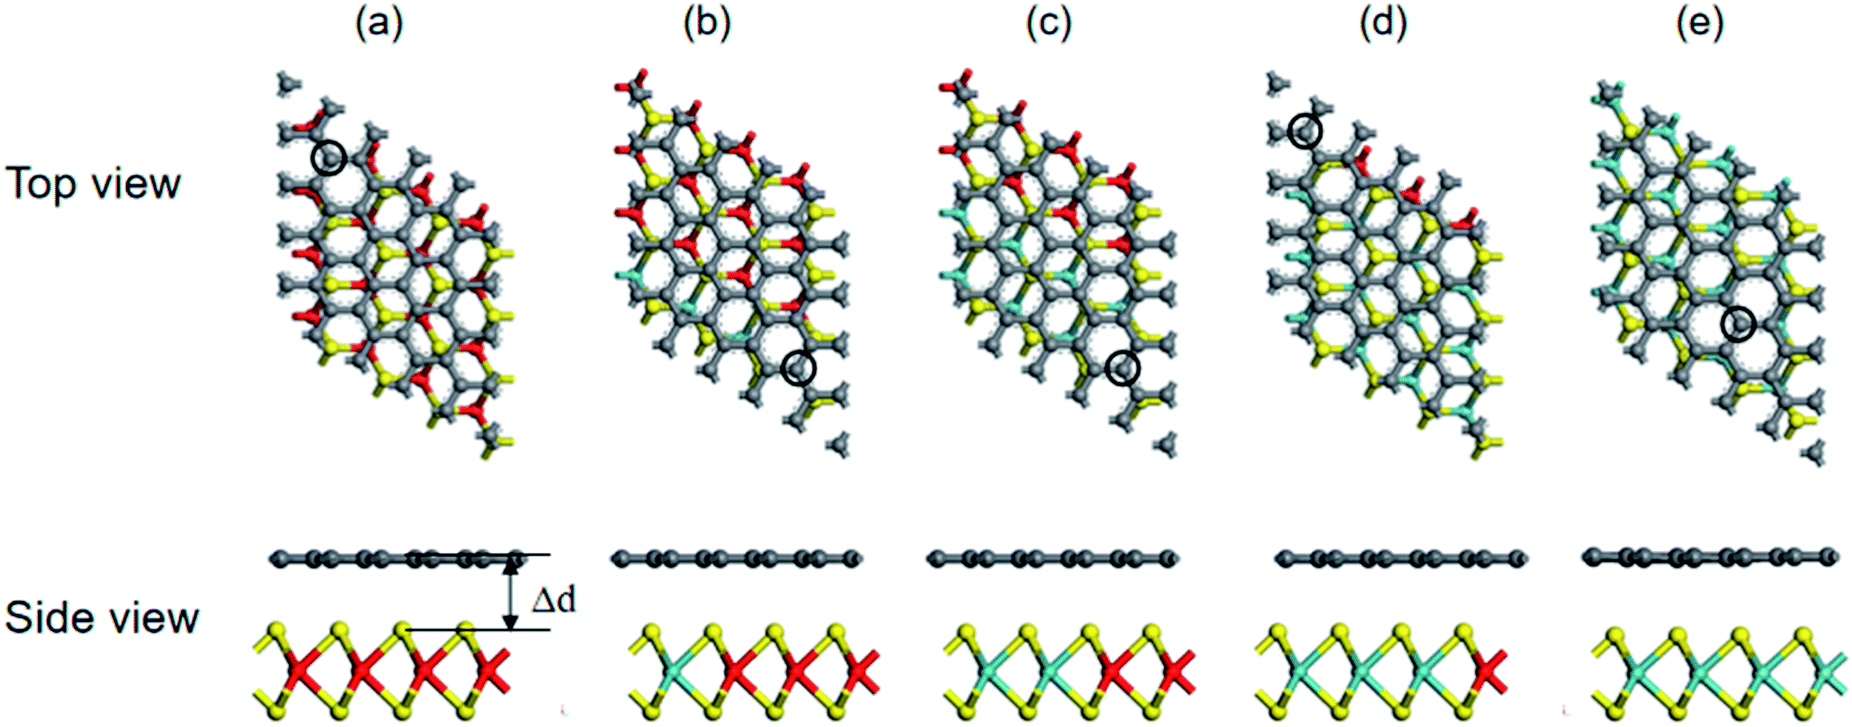 Bidirectional Heterostructures Consisting Of Graphene And Lateral Mos 2 Ws 2 Composites A First Principles Study Rsc Advances Rsc Publishing Doi 10 1039 C9rak